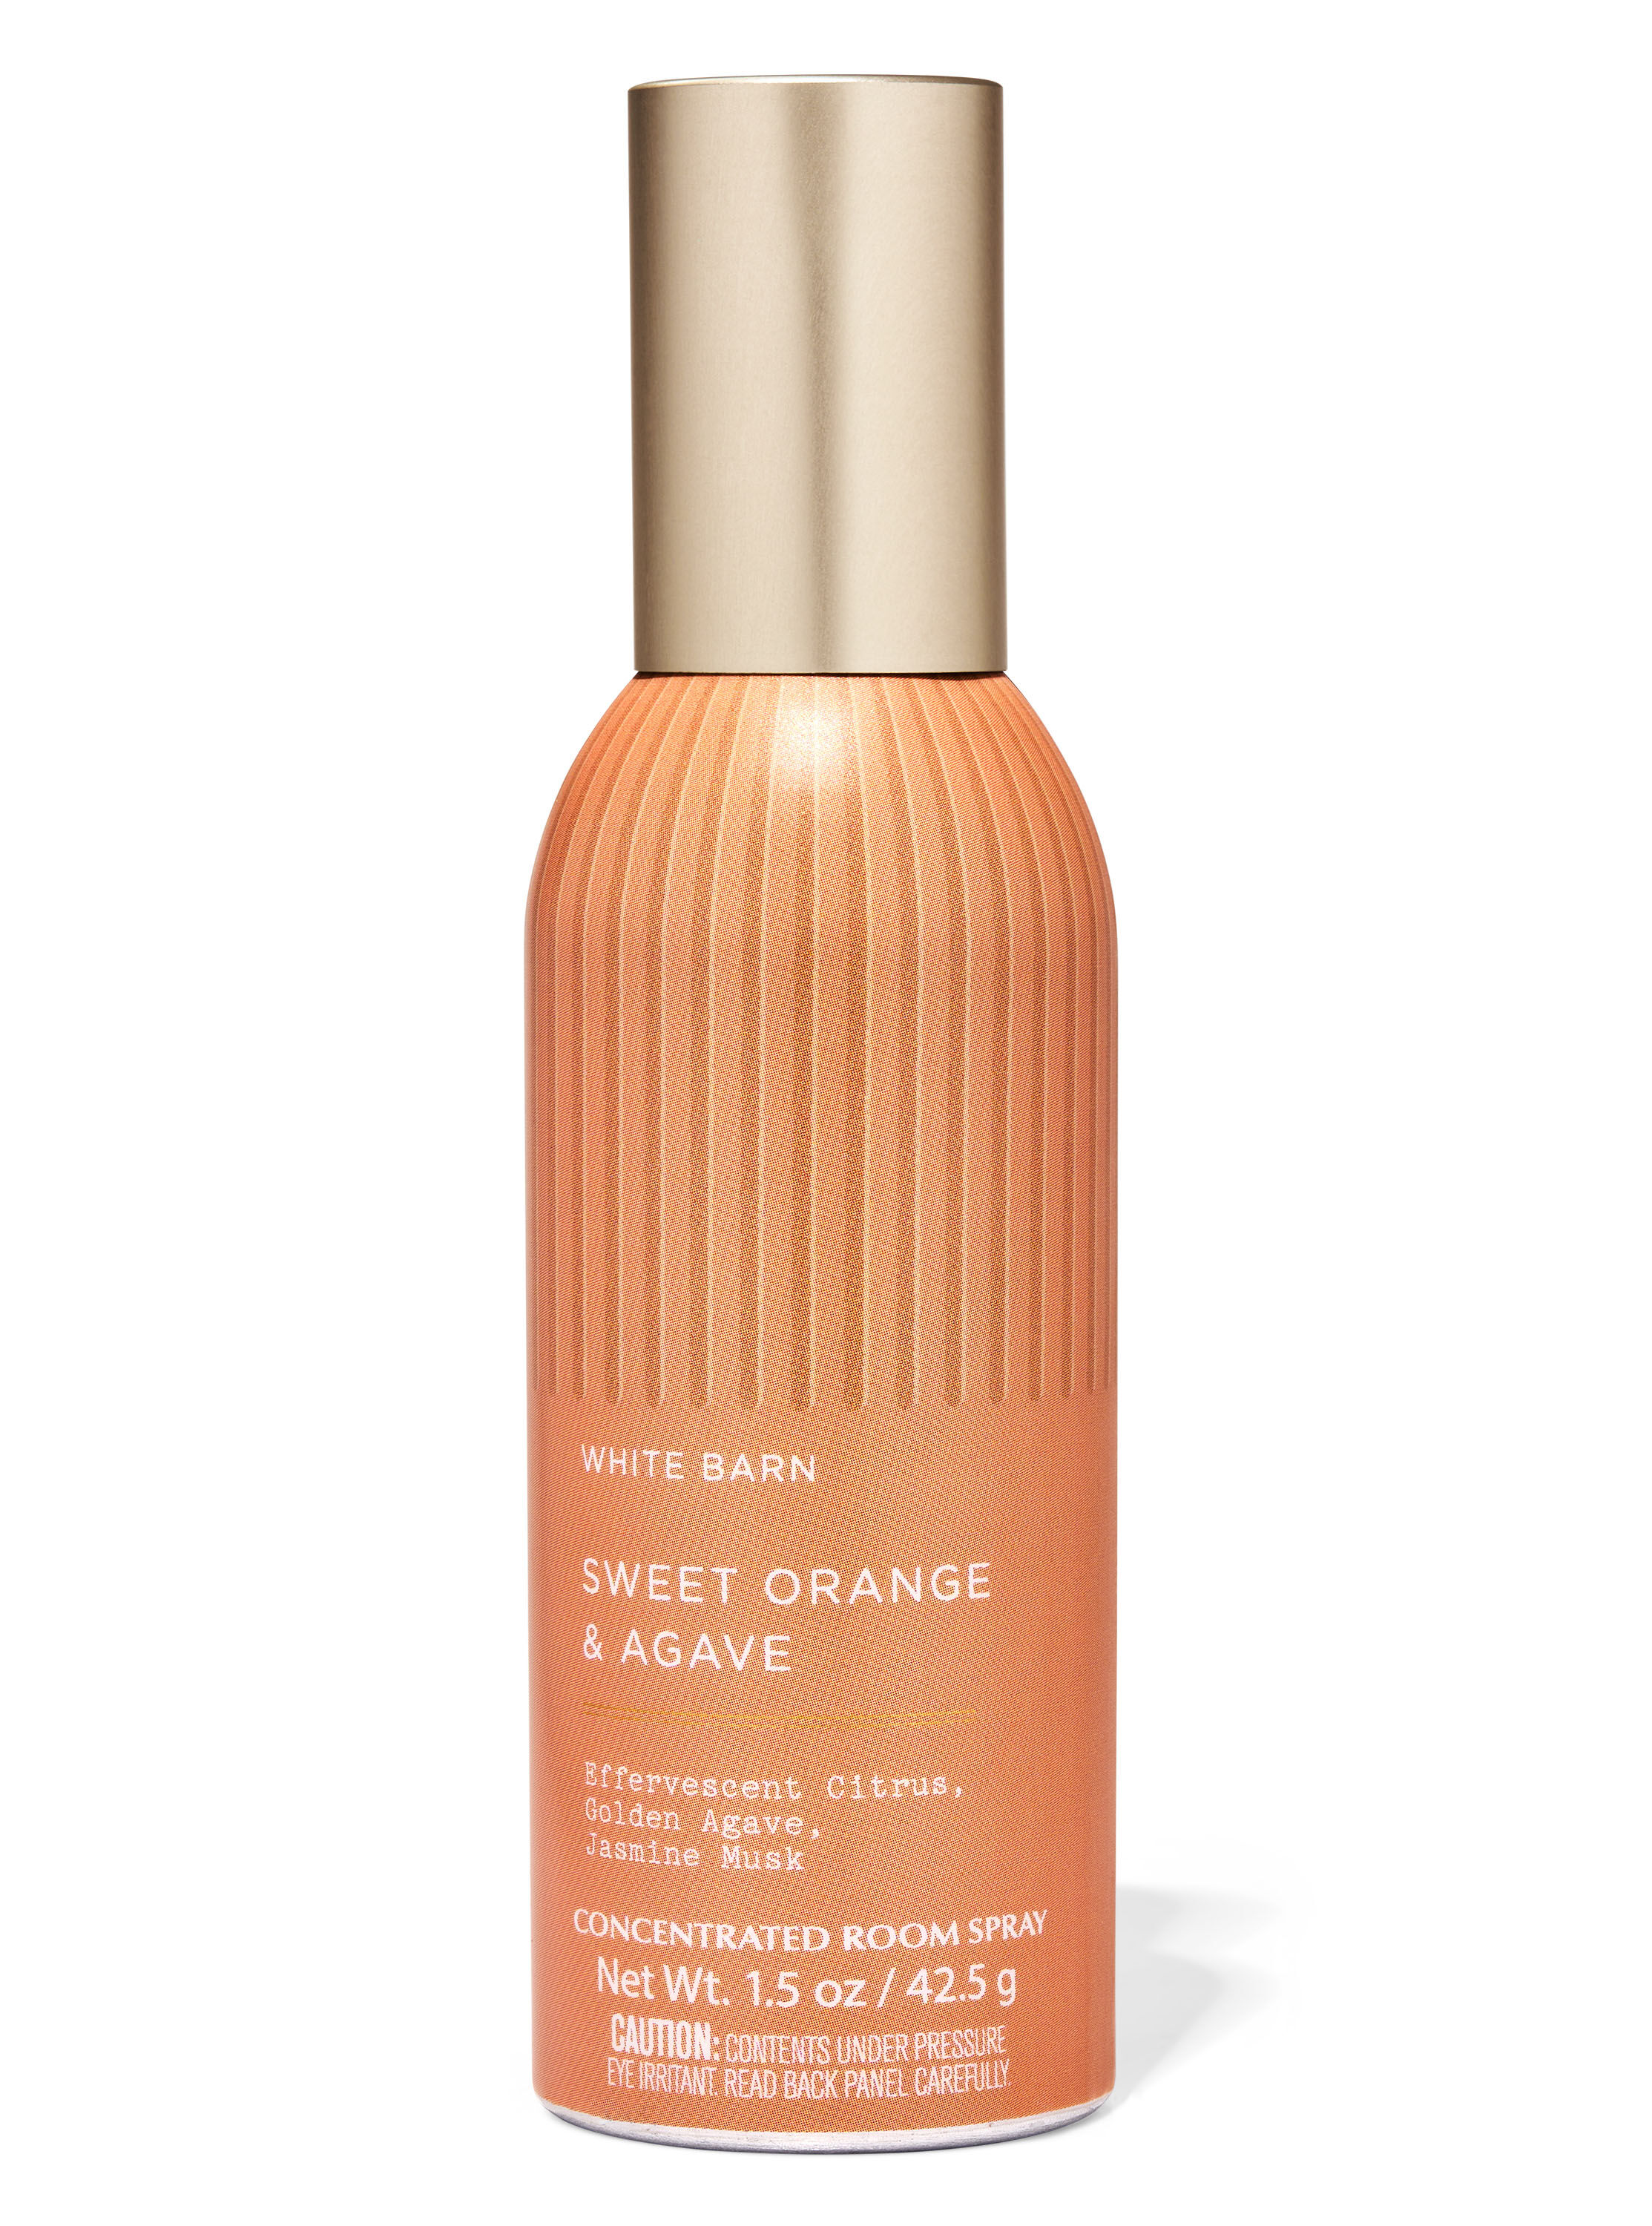 Sweet Orange & Agave Concentrated Room Spray